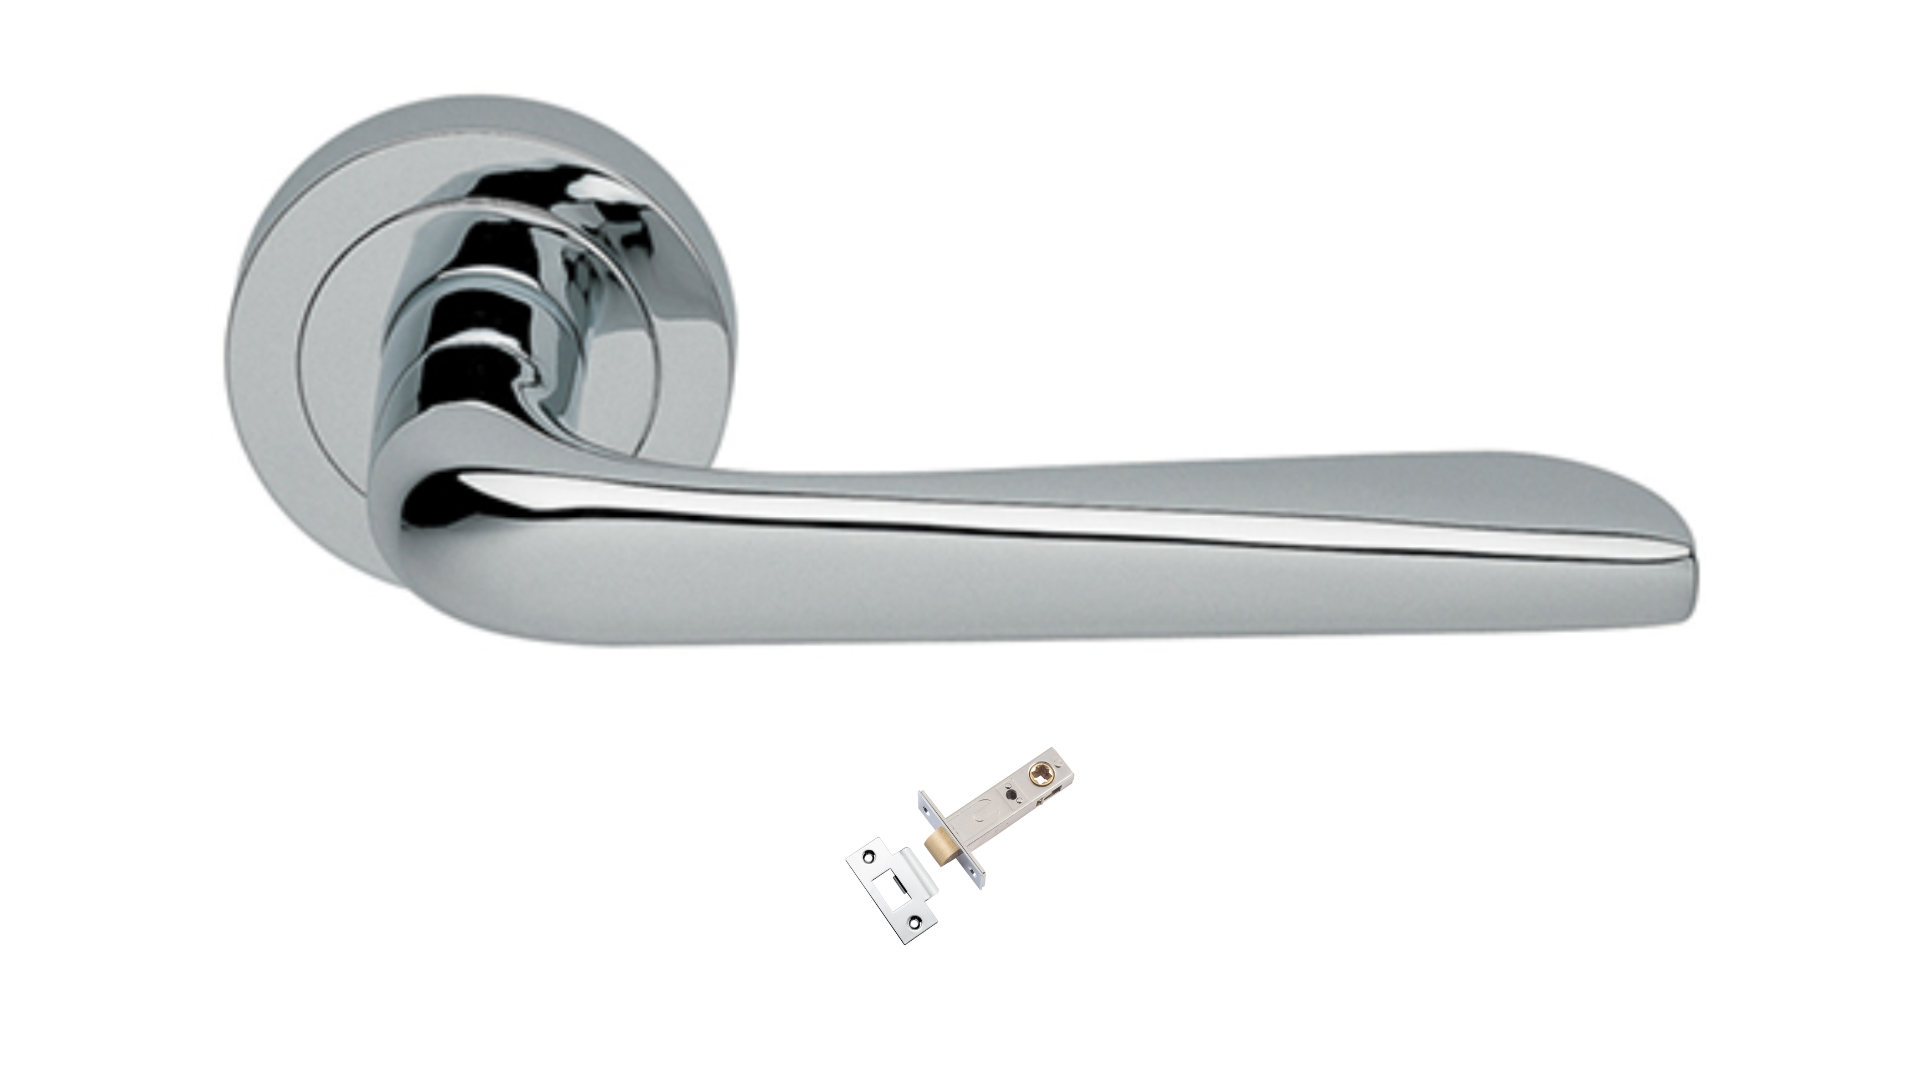 Product picture of the Petra Polished Chrome Door Handle with separate tubular latch on a white background.